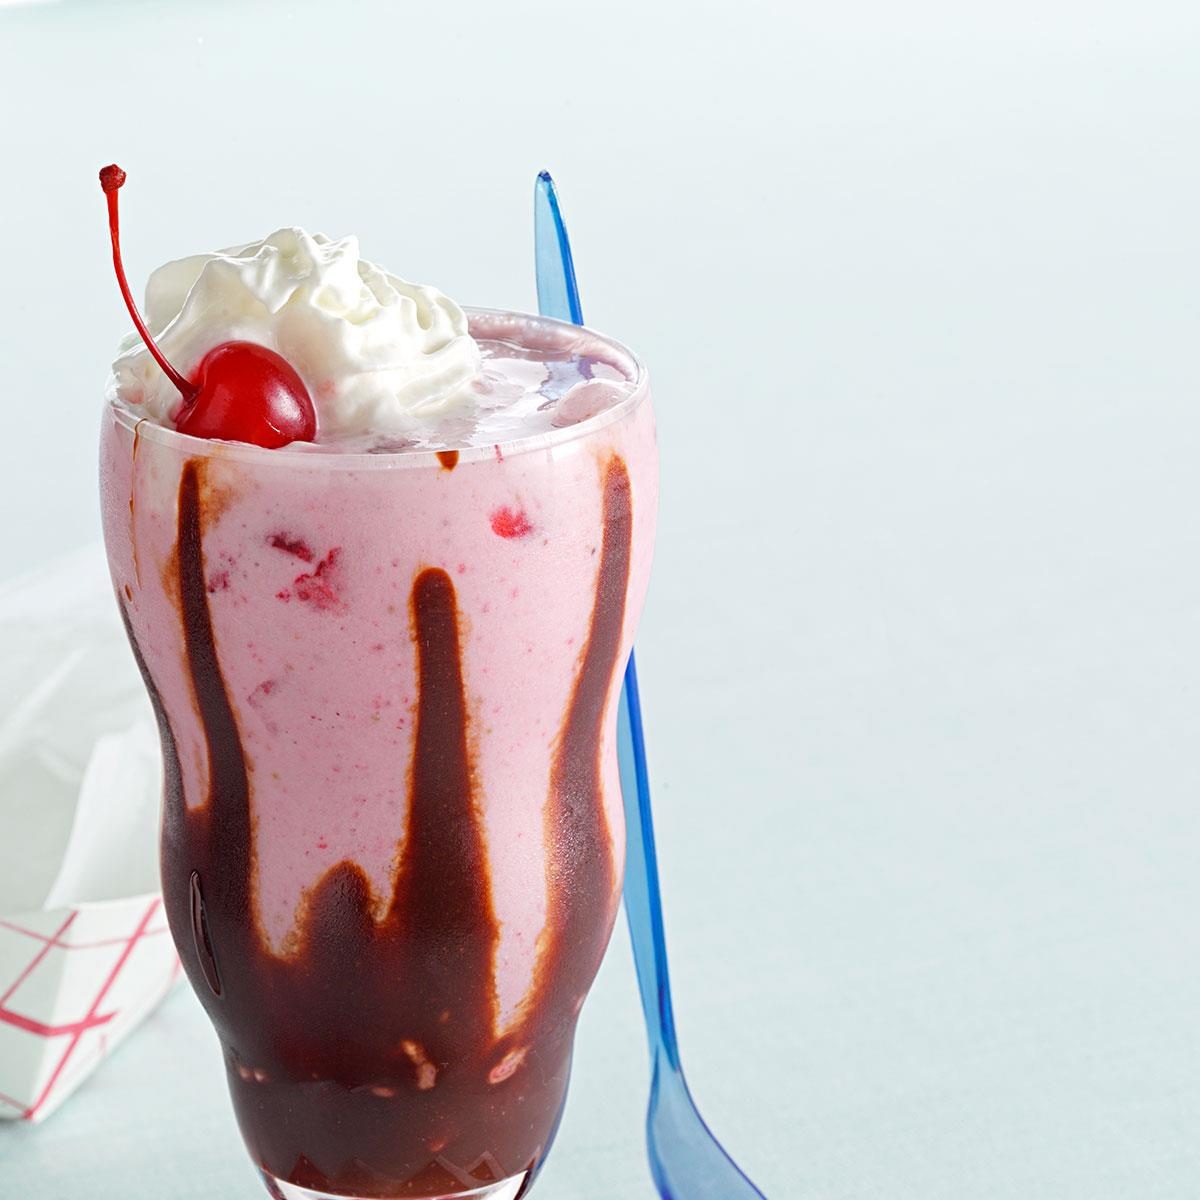 https://www.tasteofhome.com/wp-content/uploads/2018/01/Makeover-Chocolate-Covered-Strawberry-Milk-Shake_exps159678_THHC2377563B05_09_6b_RMS.jpg?fit=700%2C1024